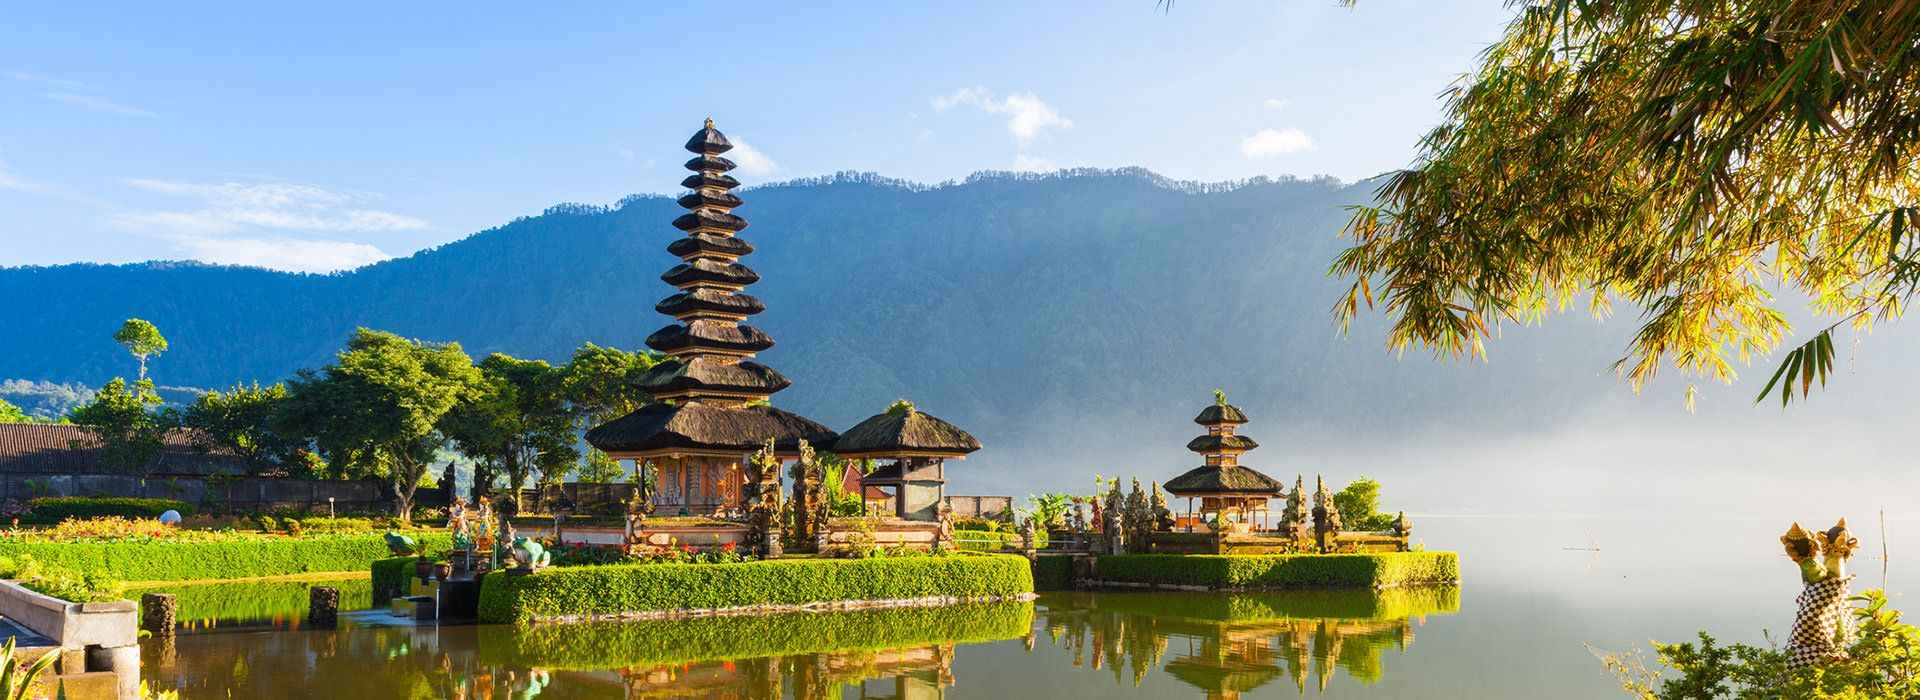 Indonesia Travel Guide - Travel Insights and Tips